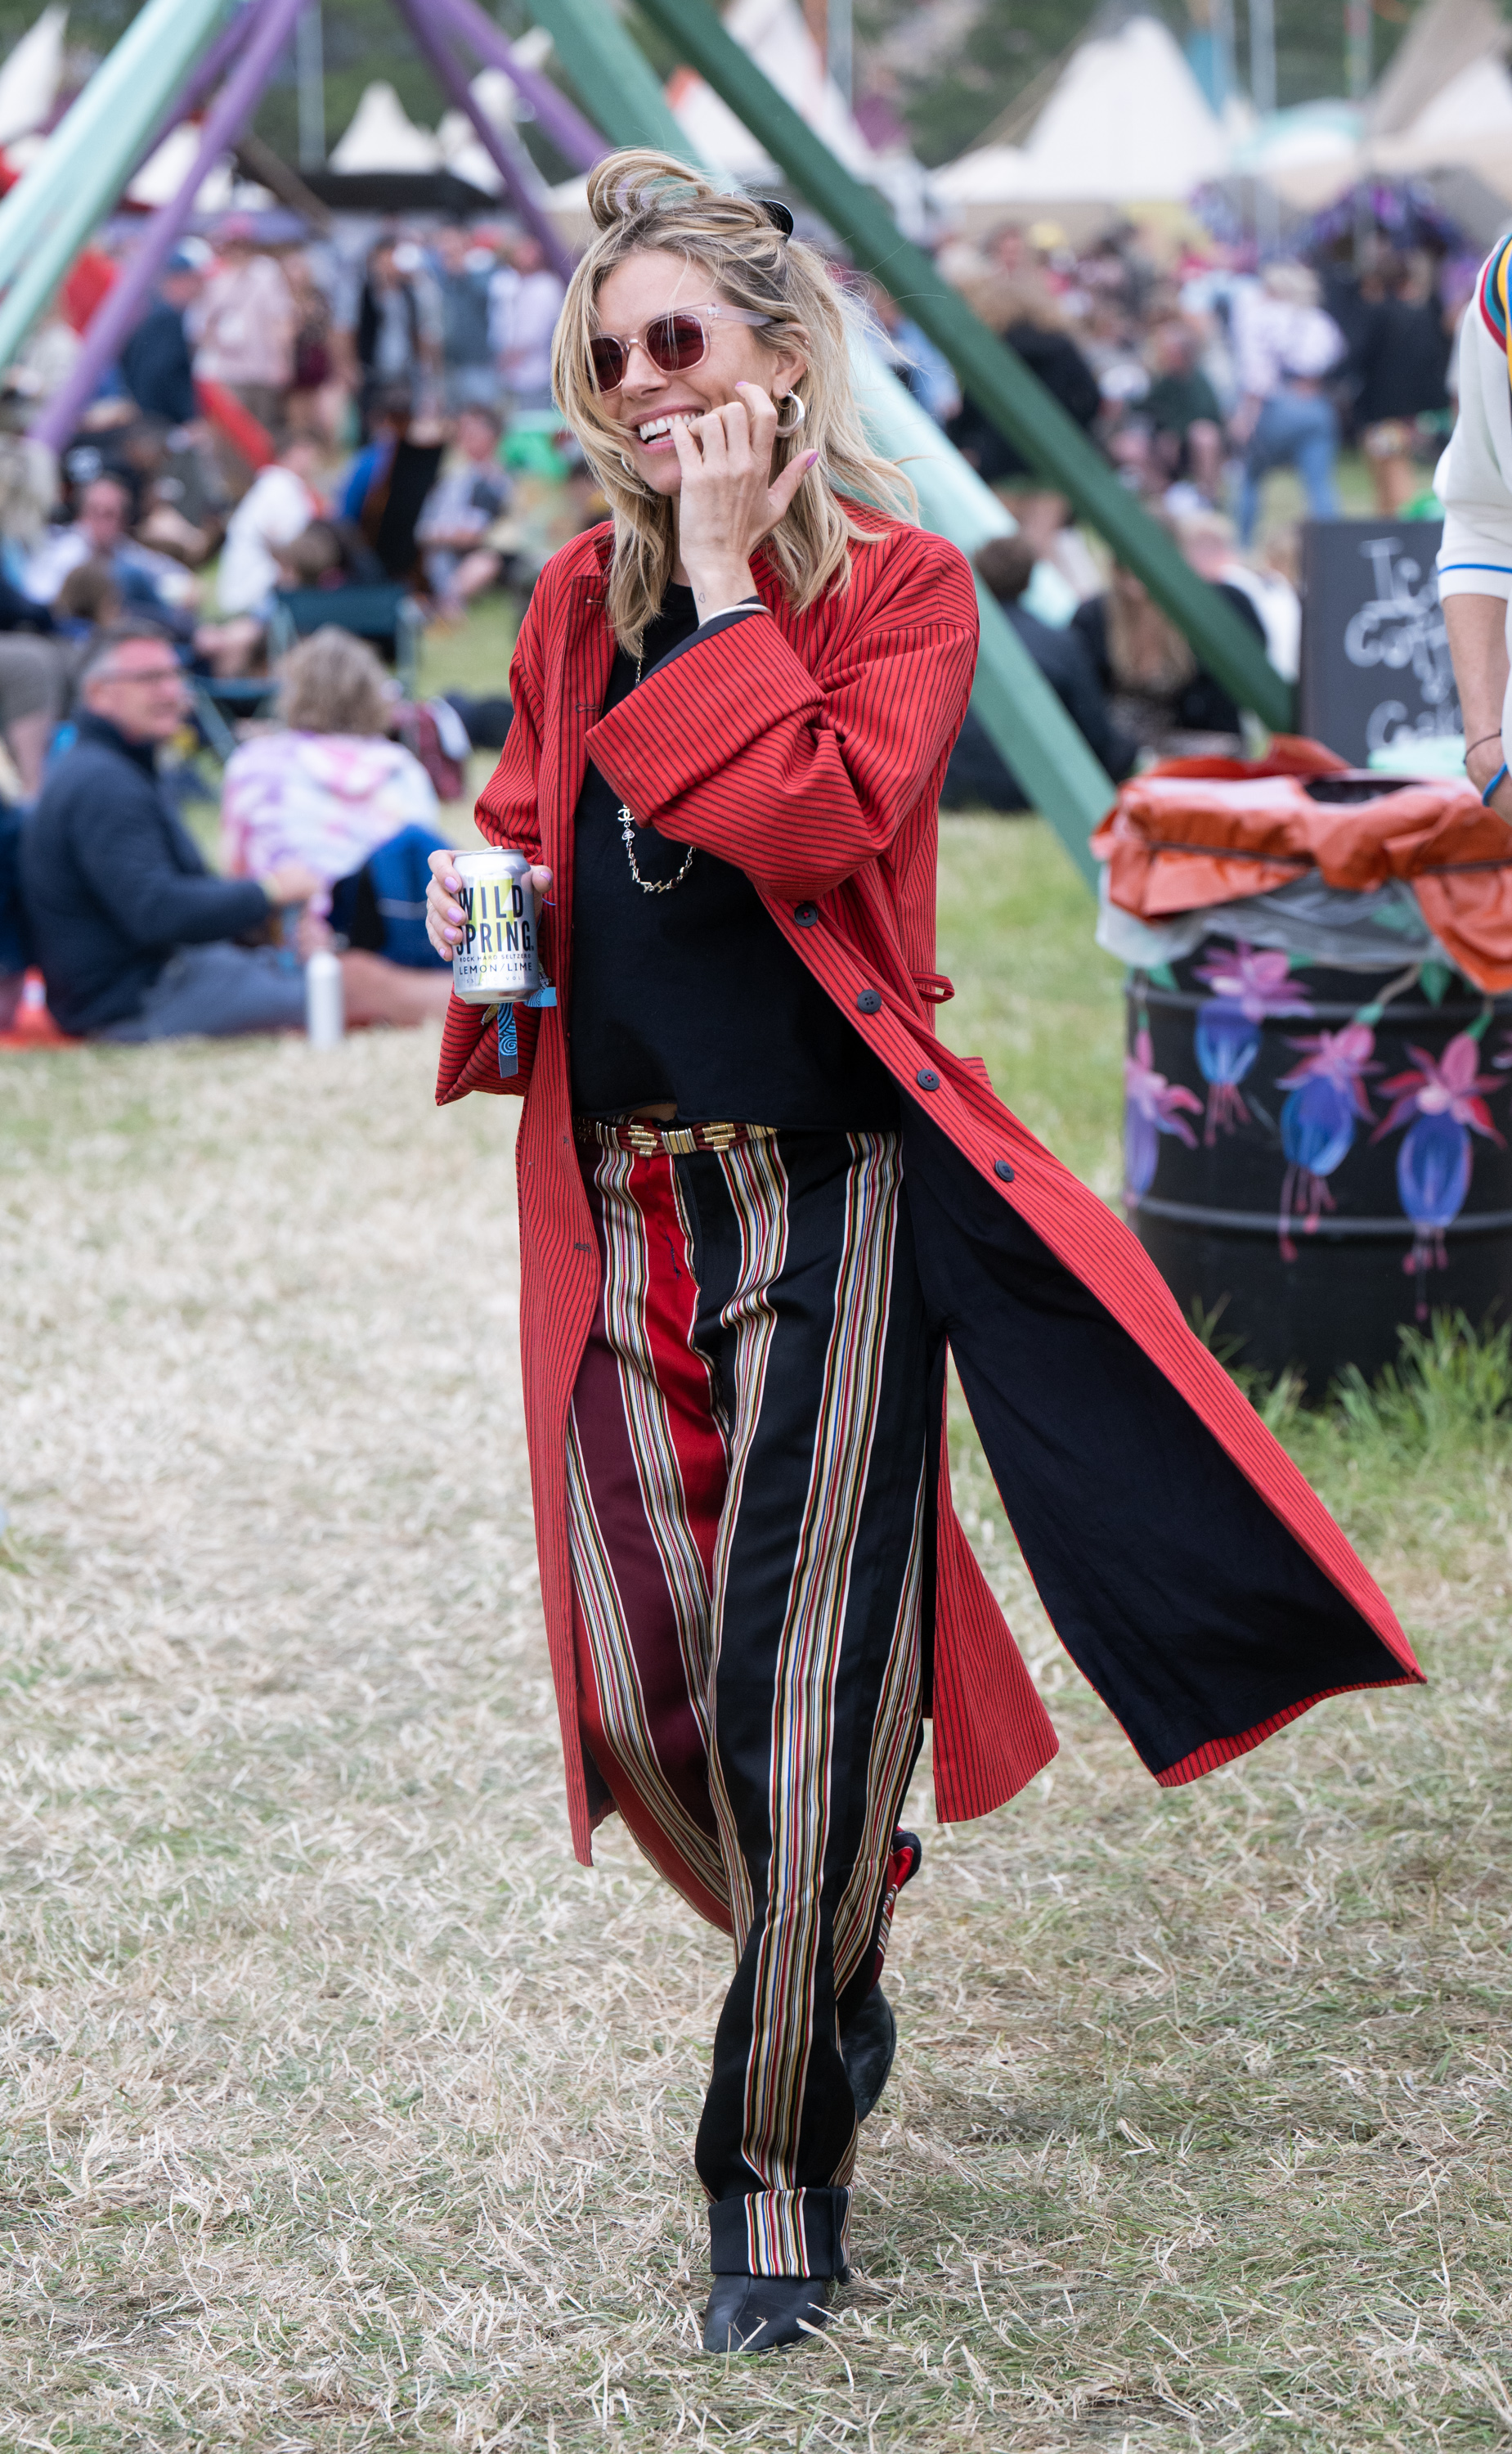 Sienna Miller at Glastonbury 2022: striped trousers